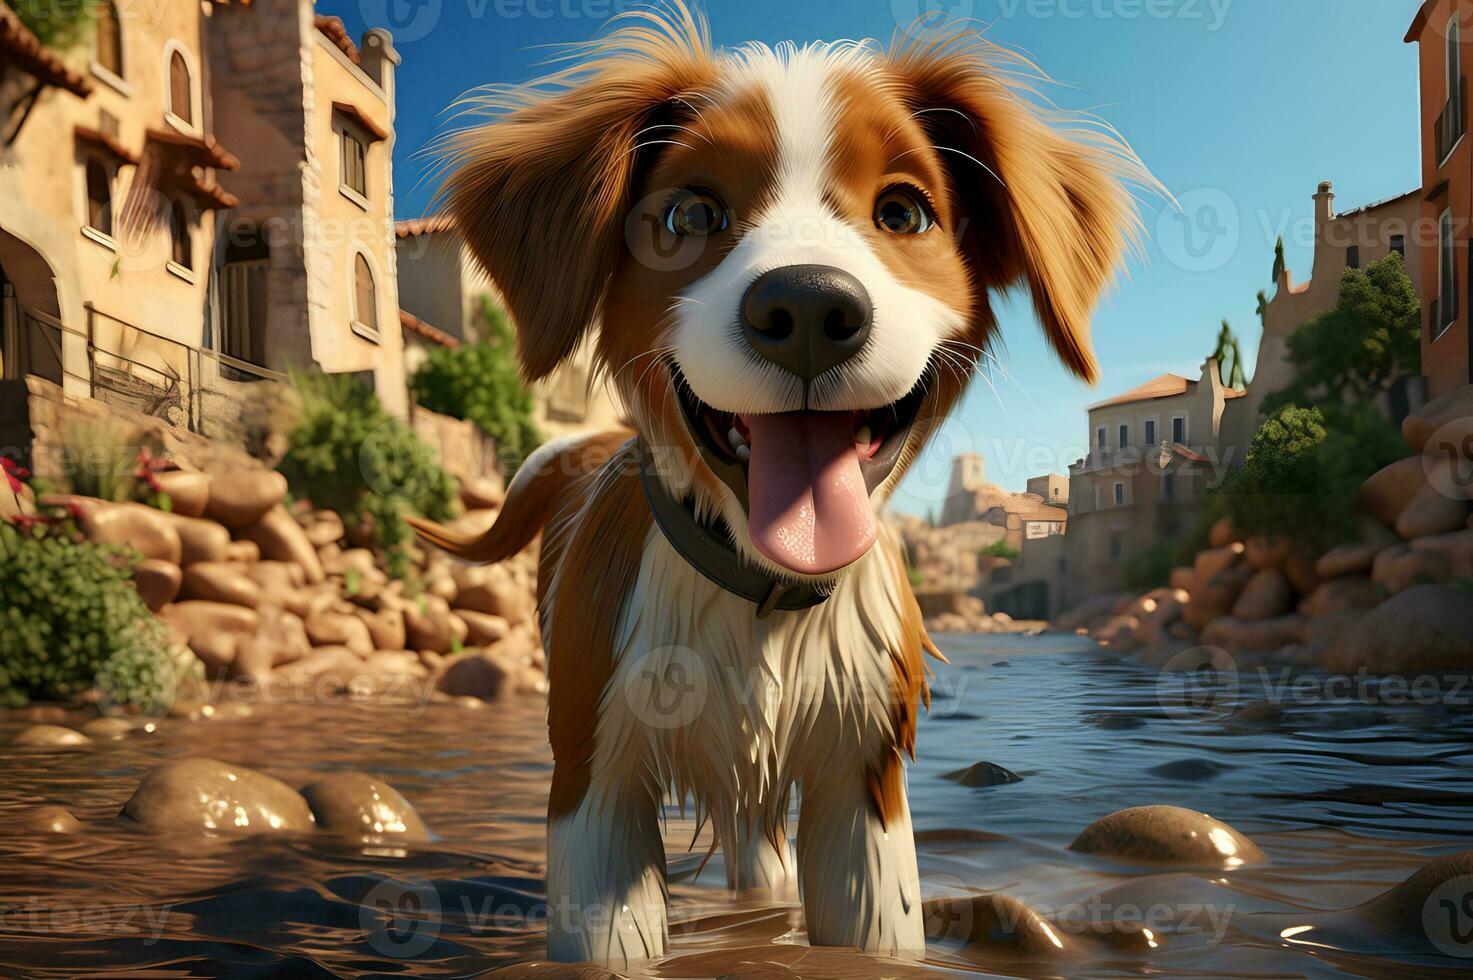 3D render of dog exploring the beach photo